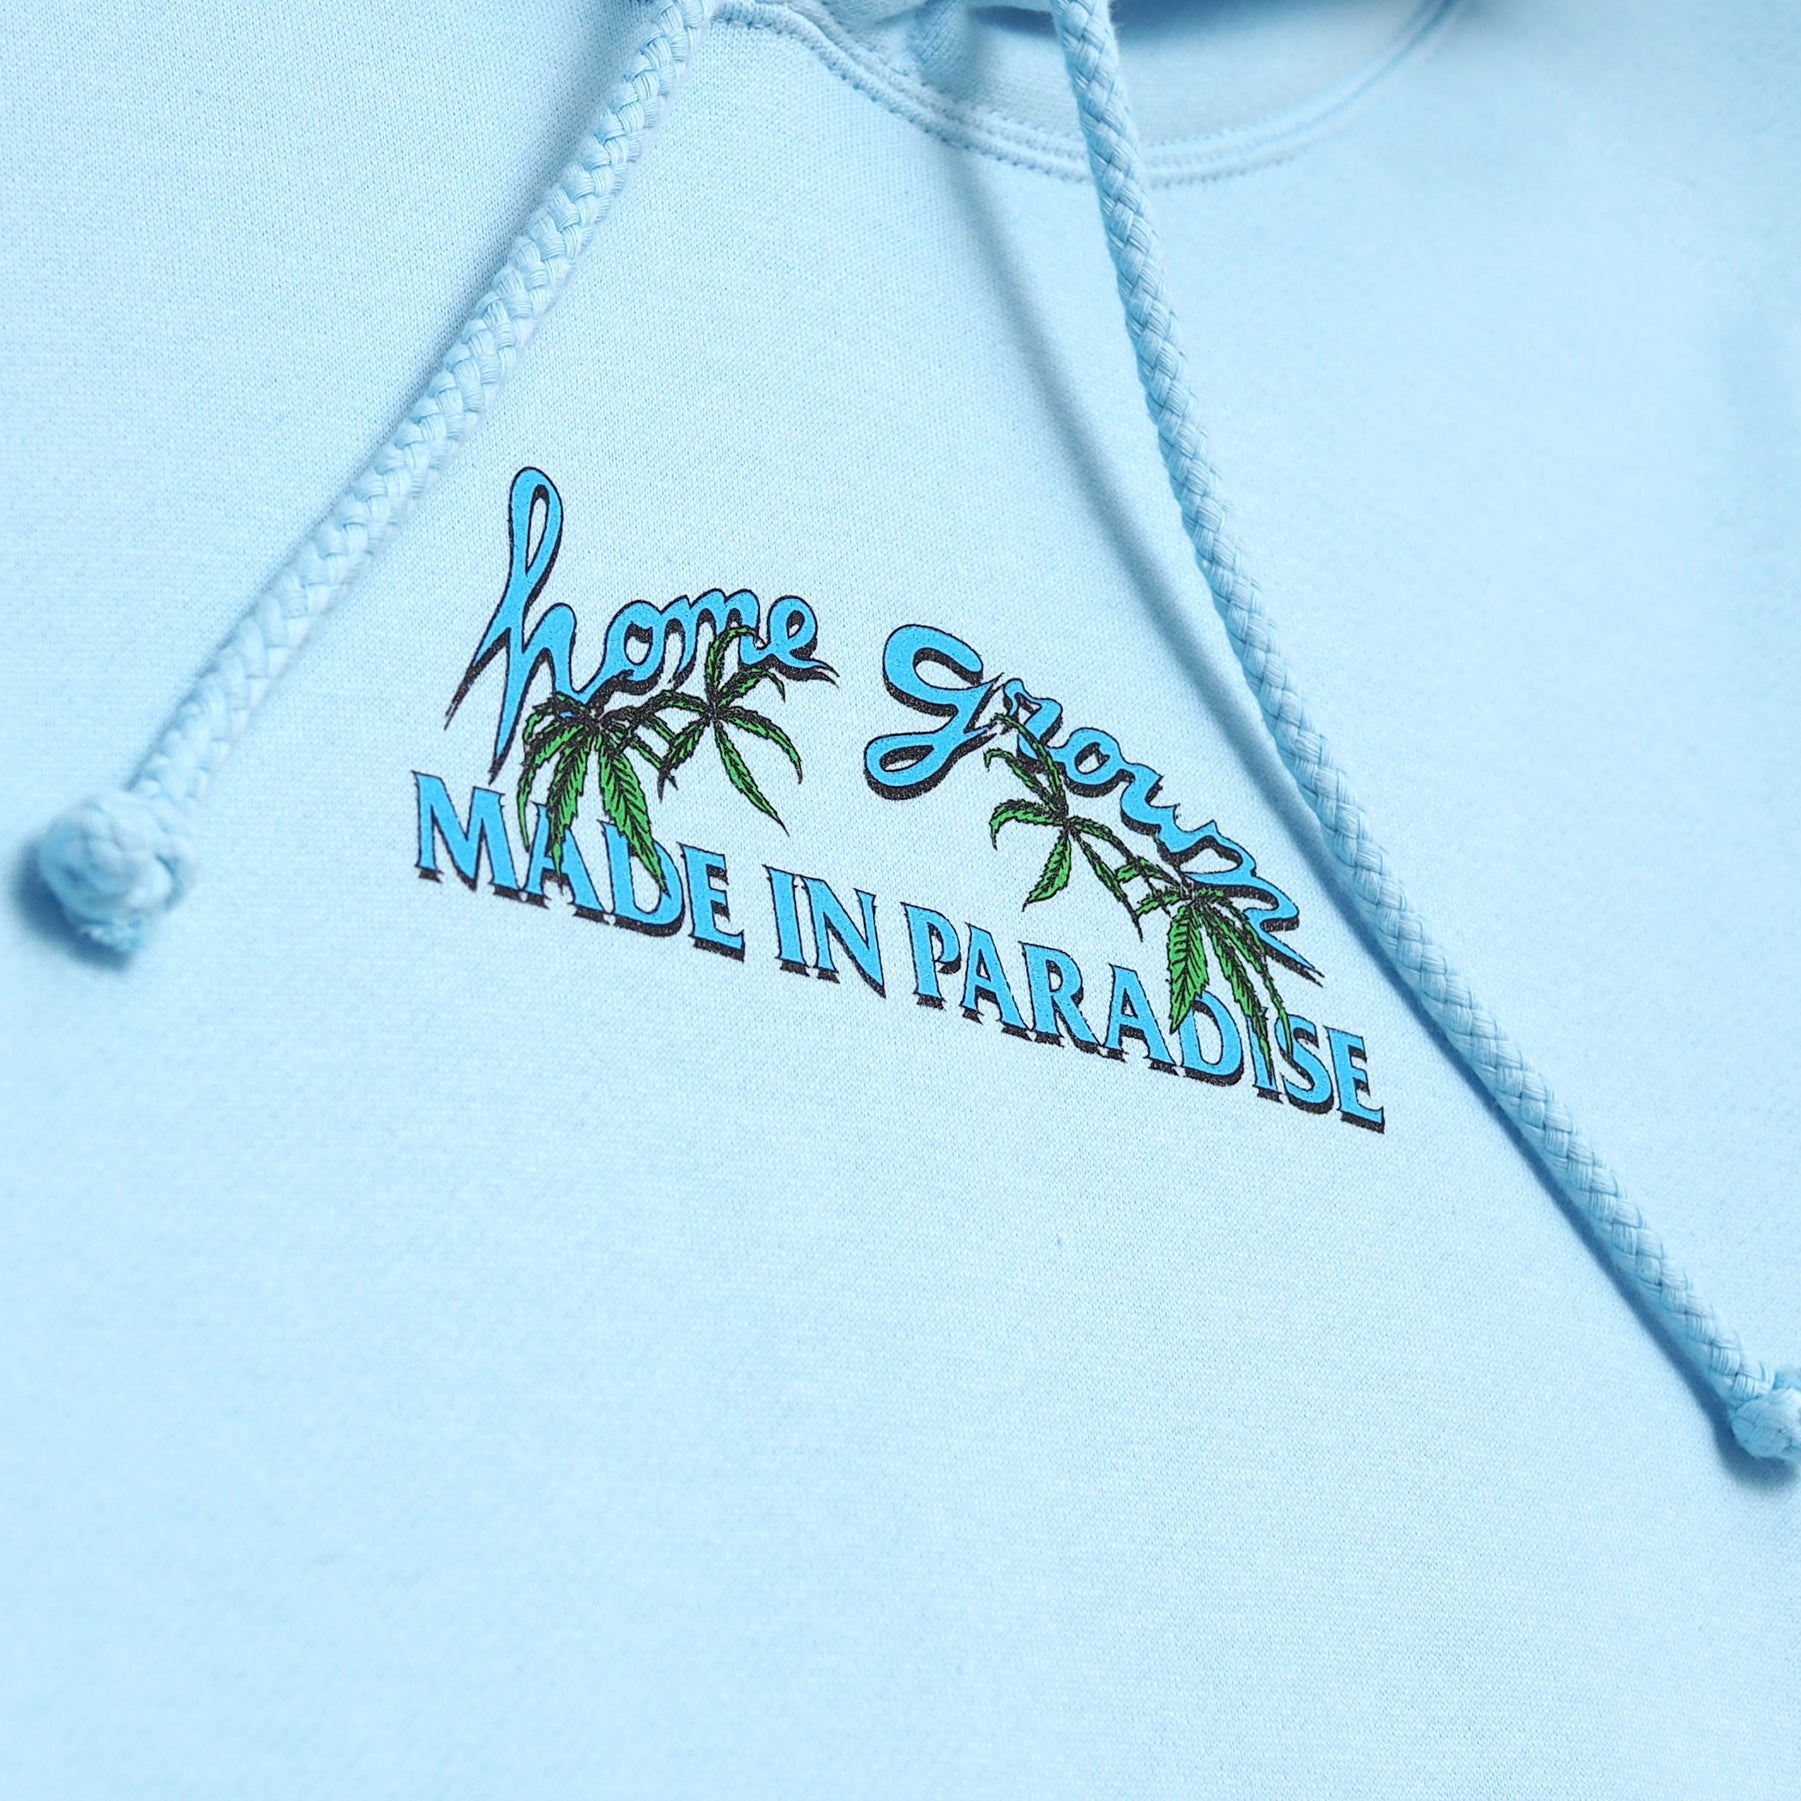 Close-up view of front graphic print of Made in Paradise Homegrown Collection "HOME GROWN" light blue hoodie